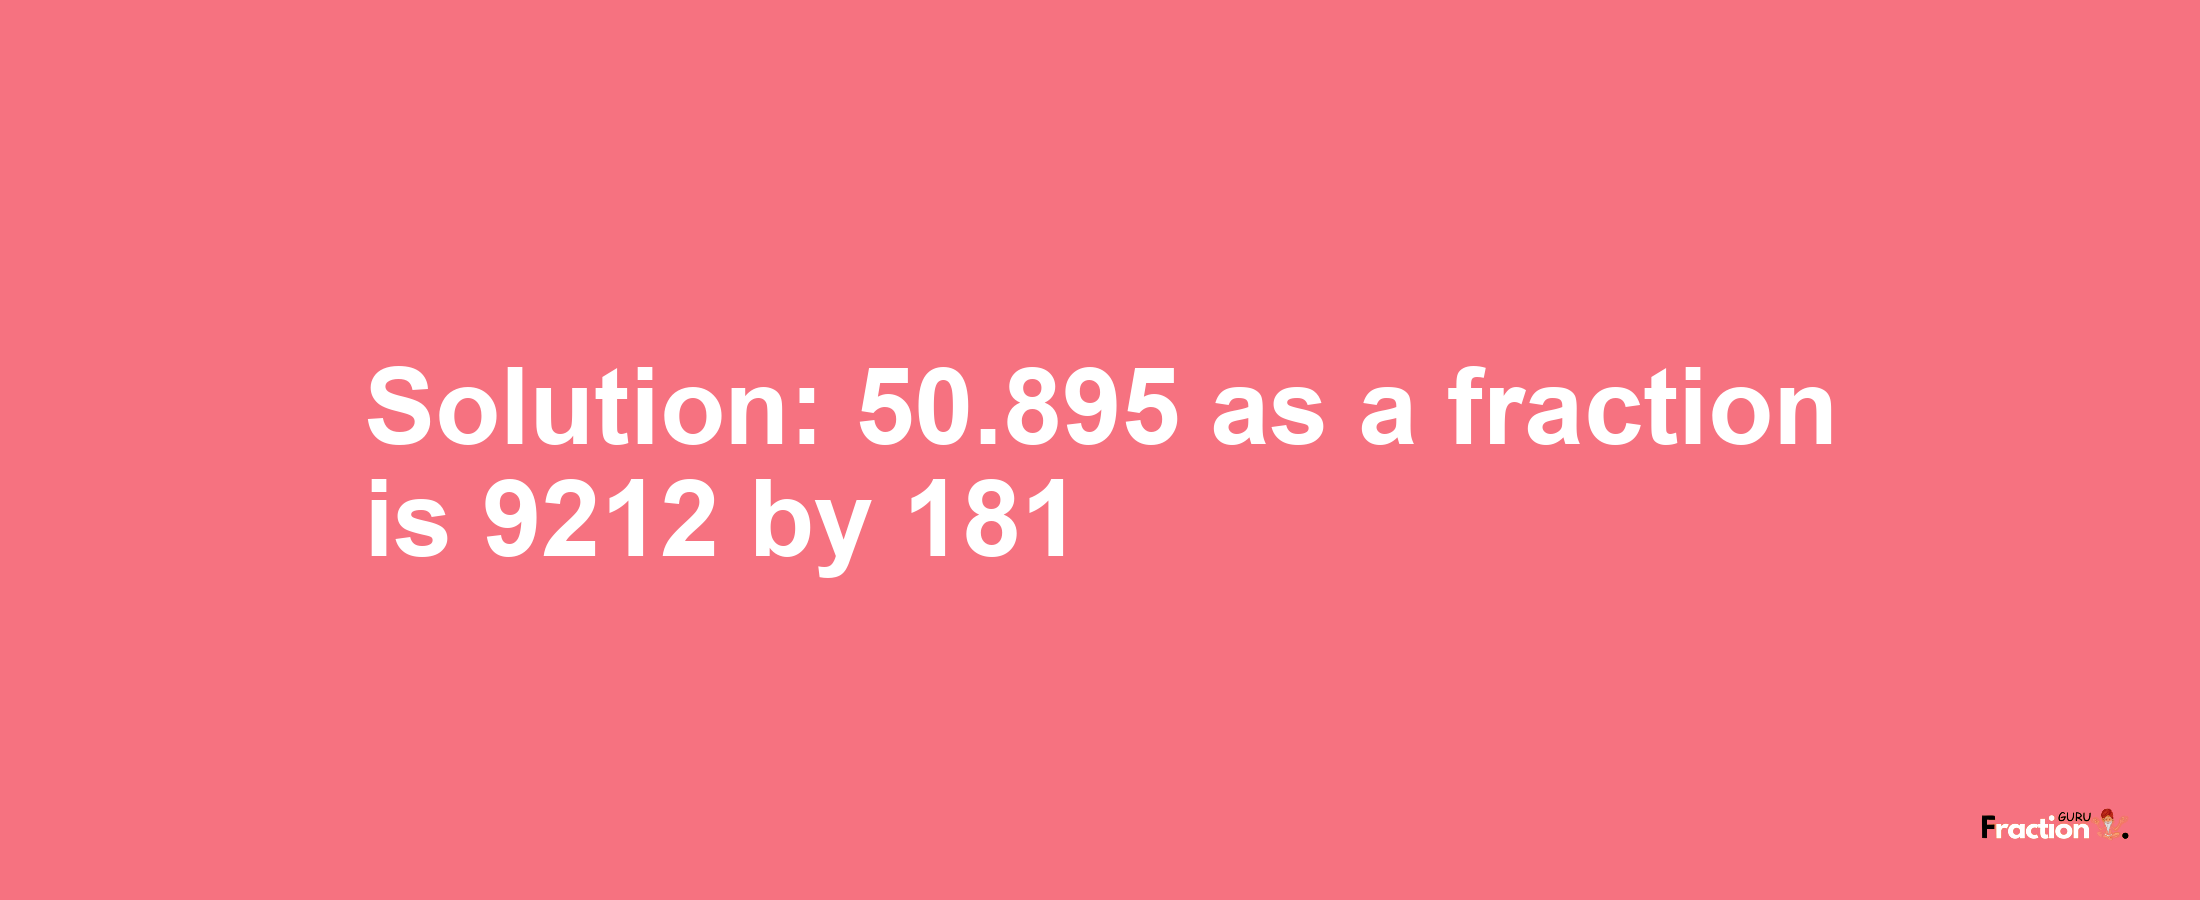 Solution:50.895 as a fraction is 9212/181